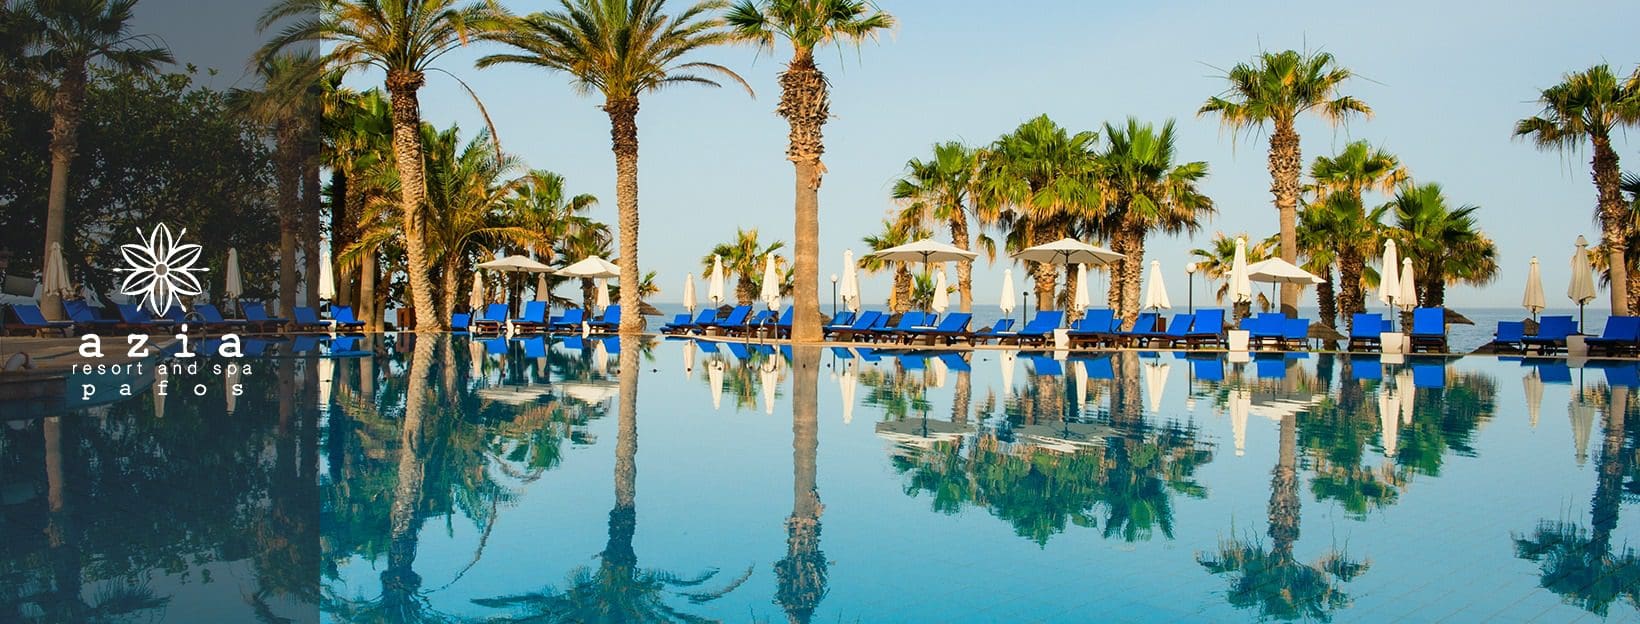 The lovely pool, surrounded by palm trees, at Azia Resort & Spa.